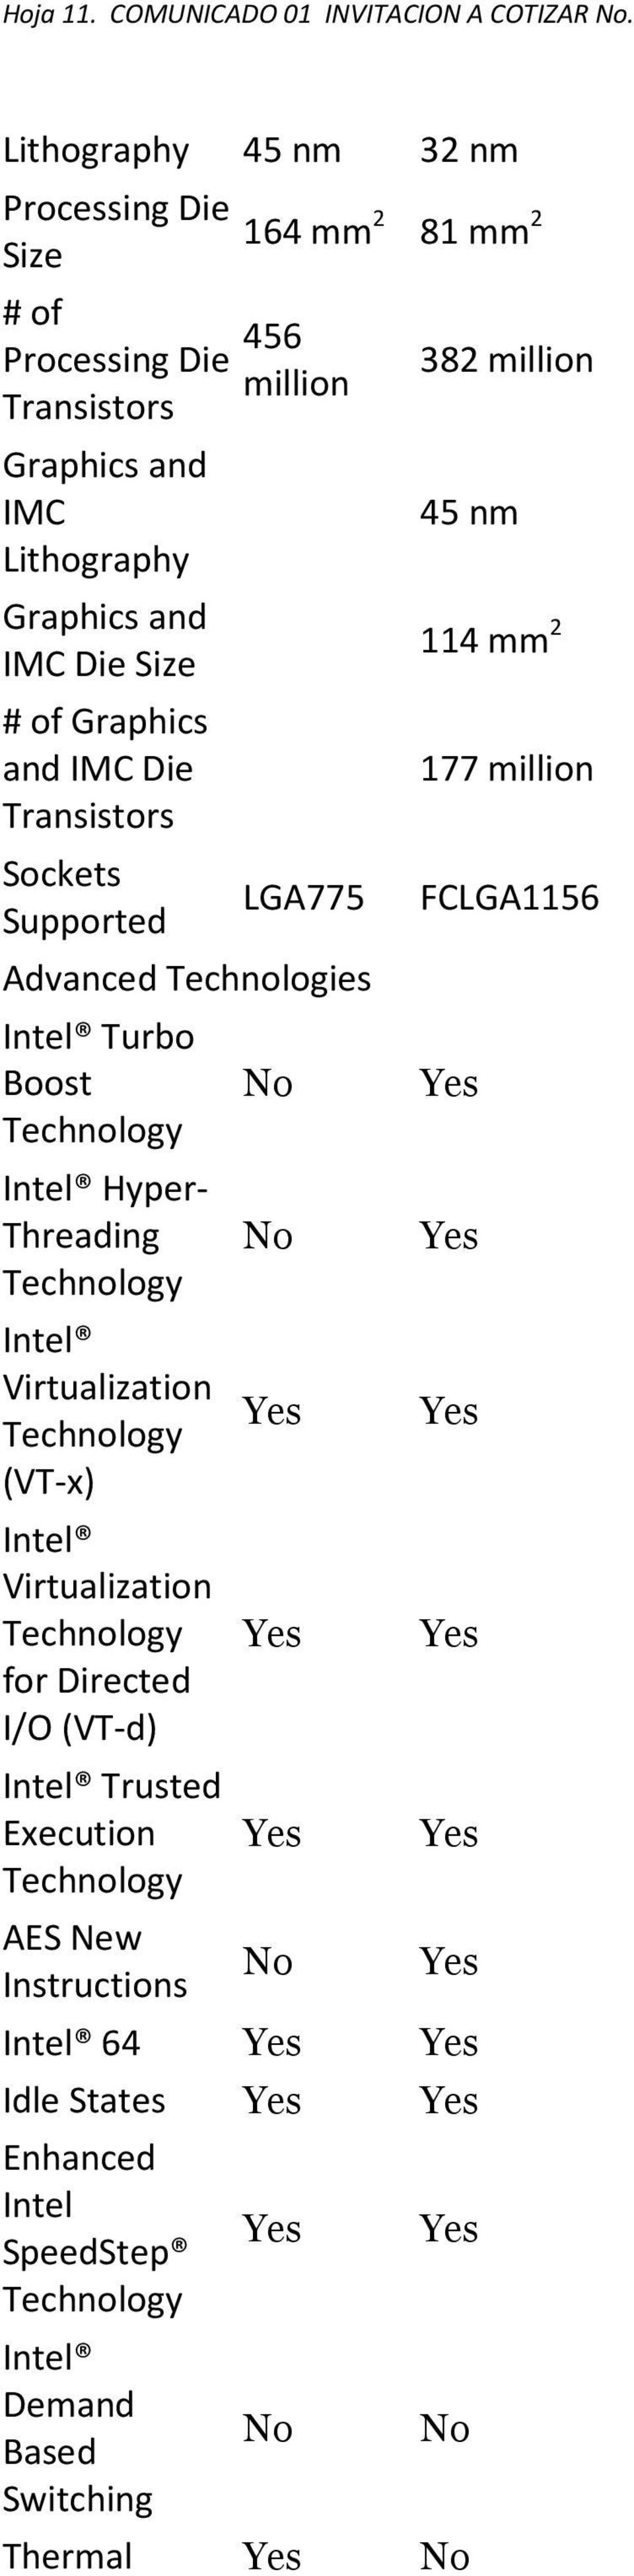 Size # of Graphics and IMC Die Transistors Sockets Supported Advanced Technologies Turbo Boost Hyper- Threading Virtualization (VT-x)